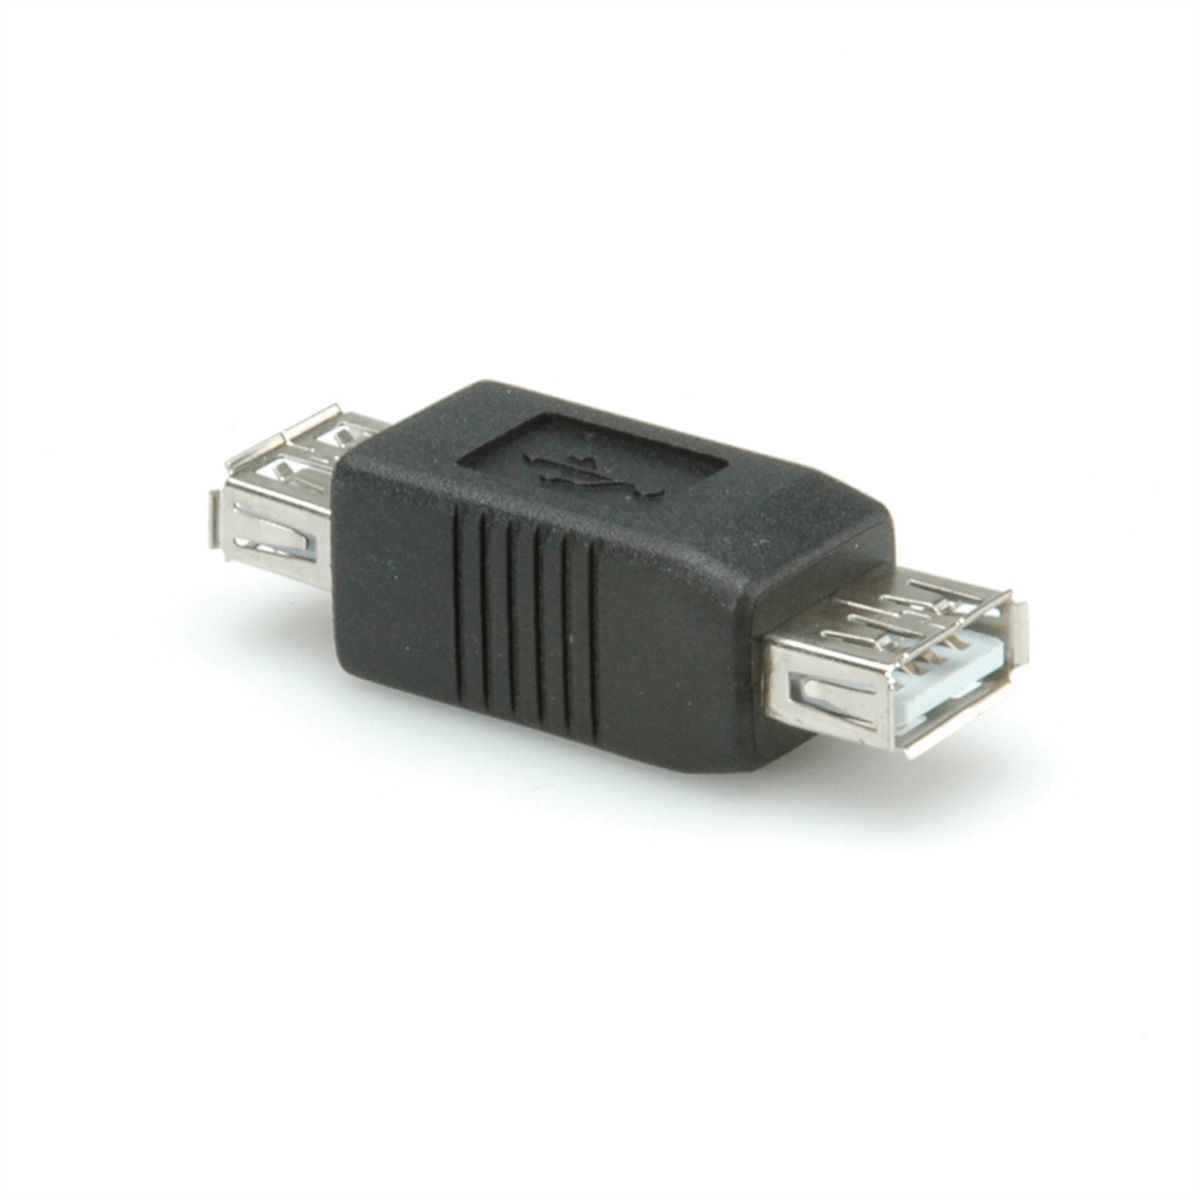 Female To Female Type A USB 2.0 Gender Changer Adapter Converter 